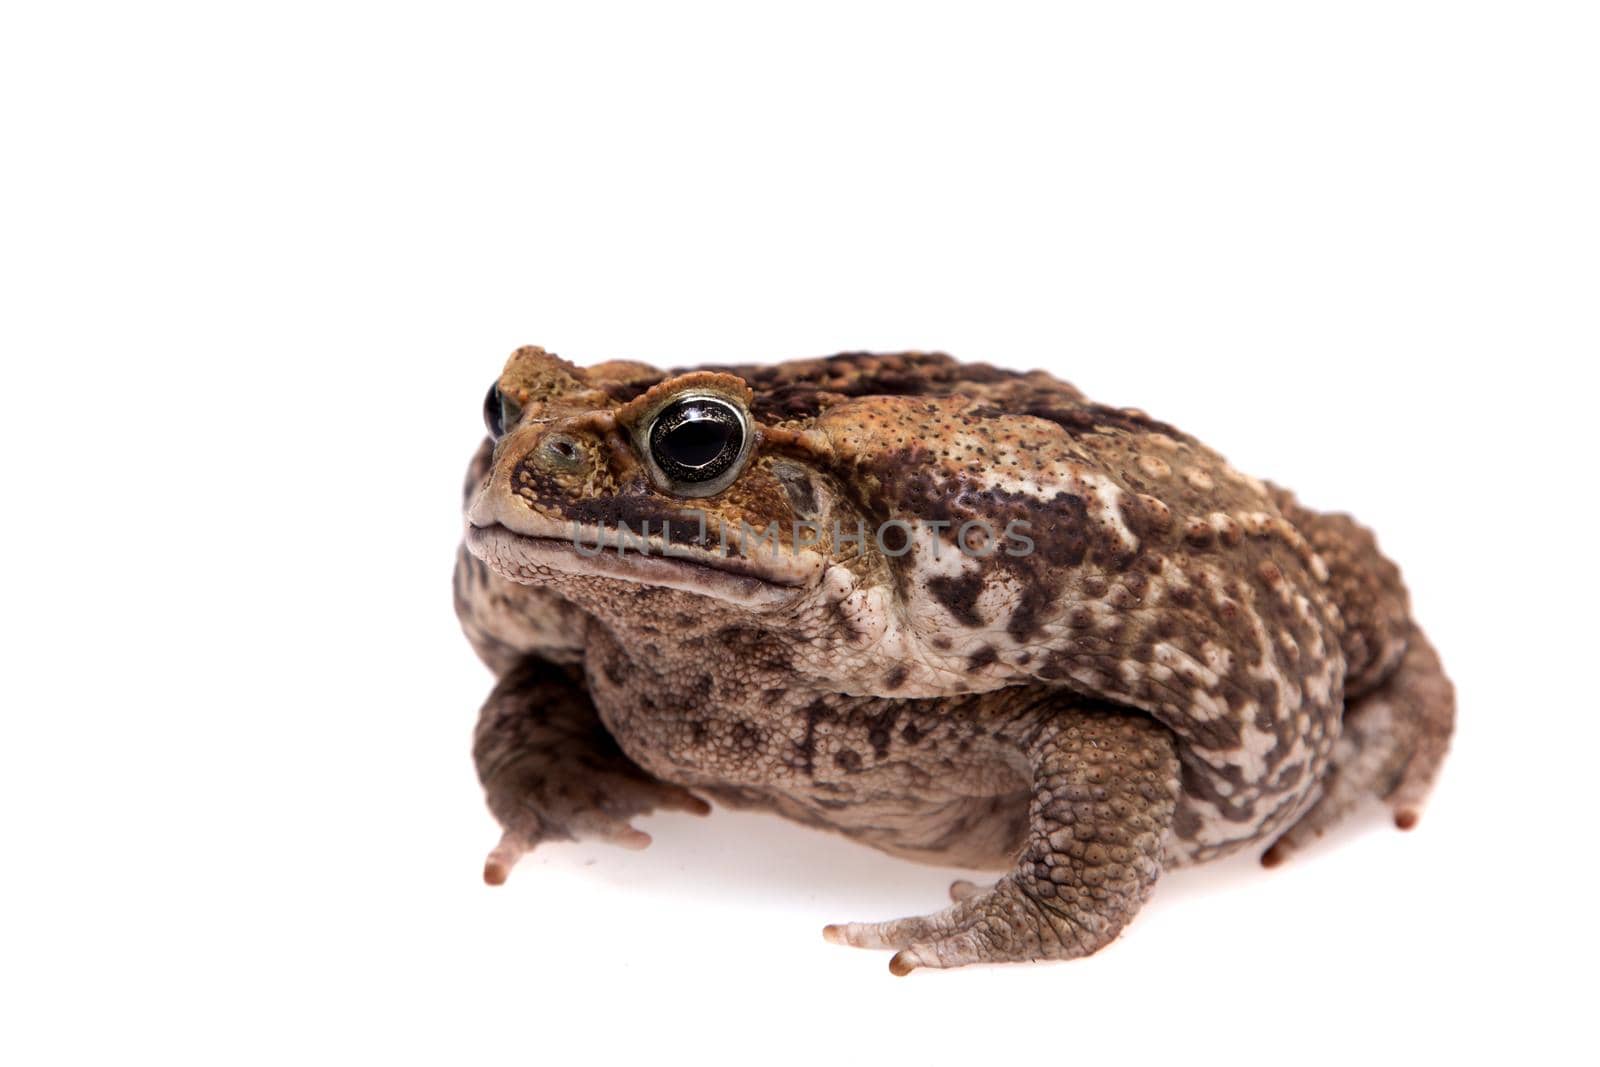 Cane or giant neotropical toad on white by RosaJay